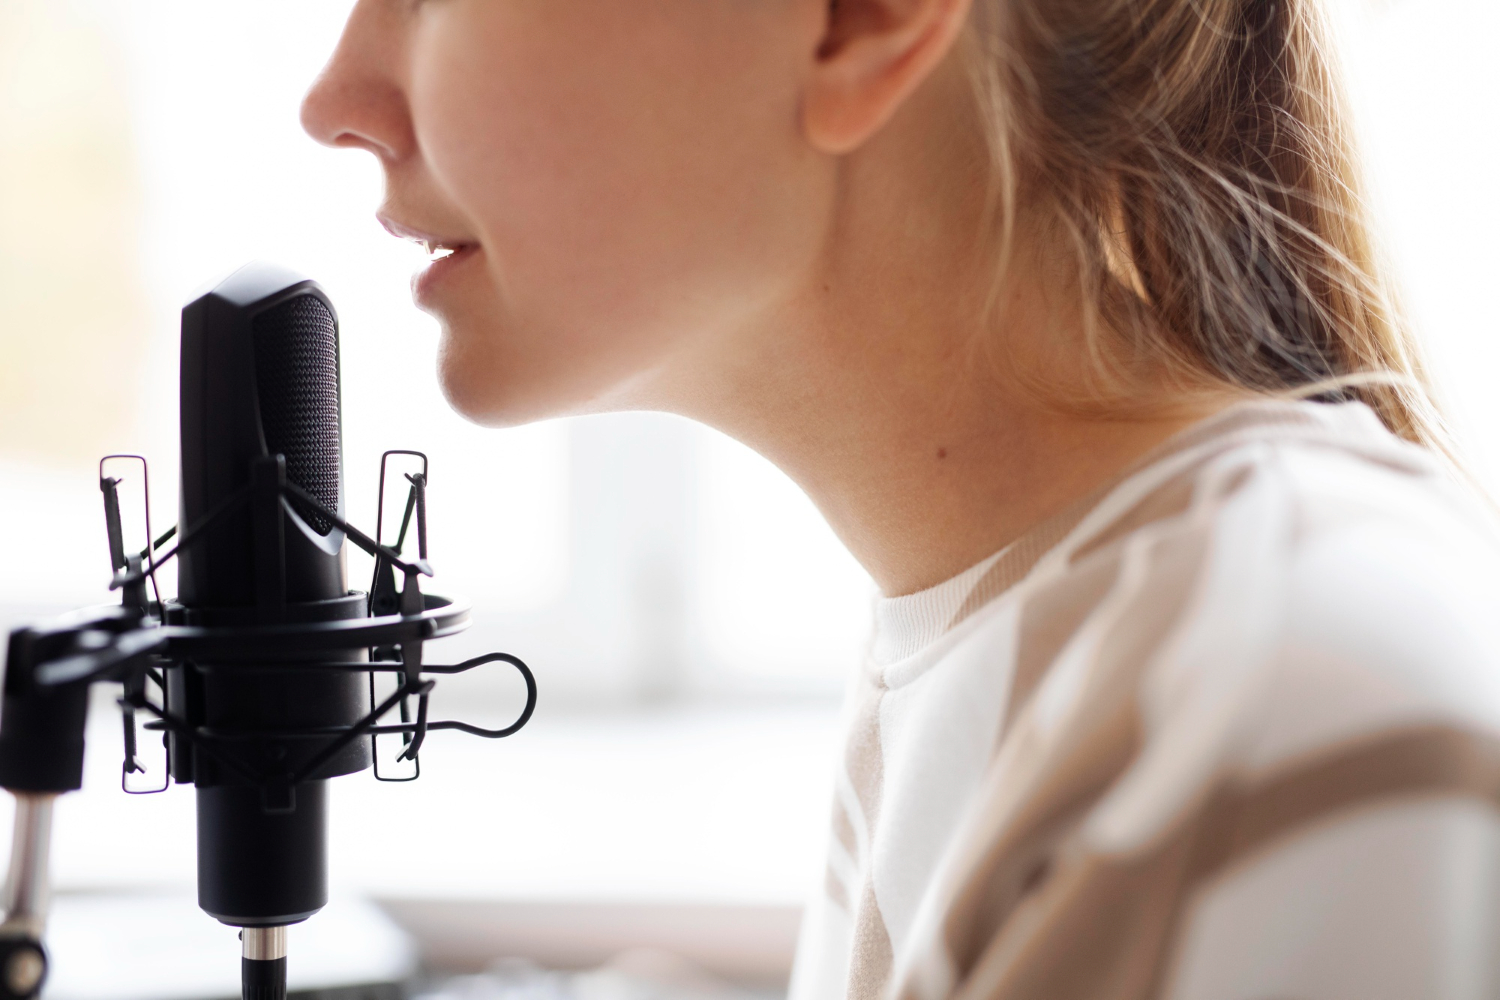 https://murf.ai/resources/media/posts/154/close-up-woman-with-microphone.jpg